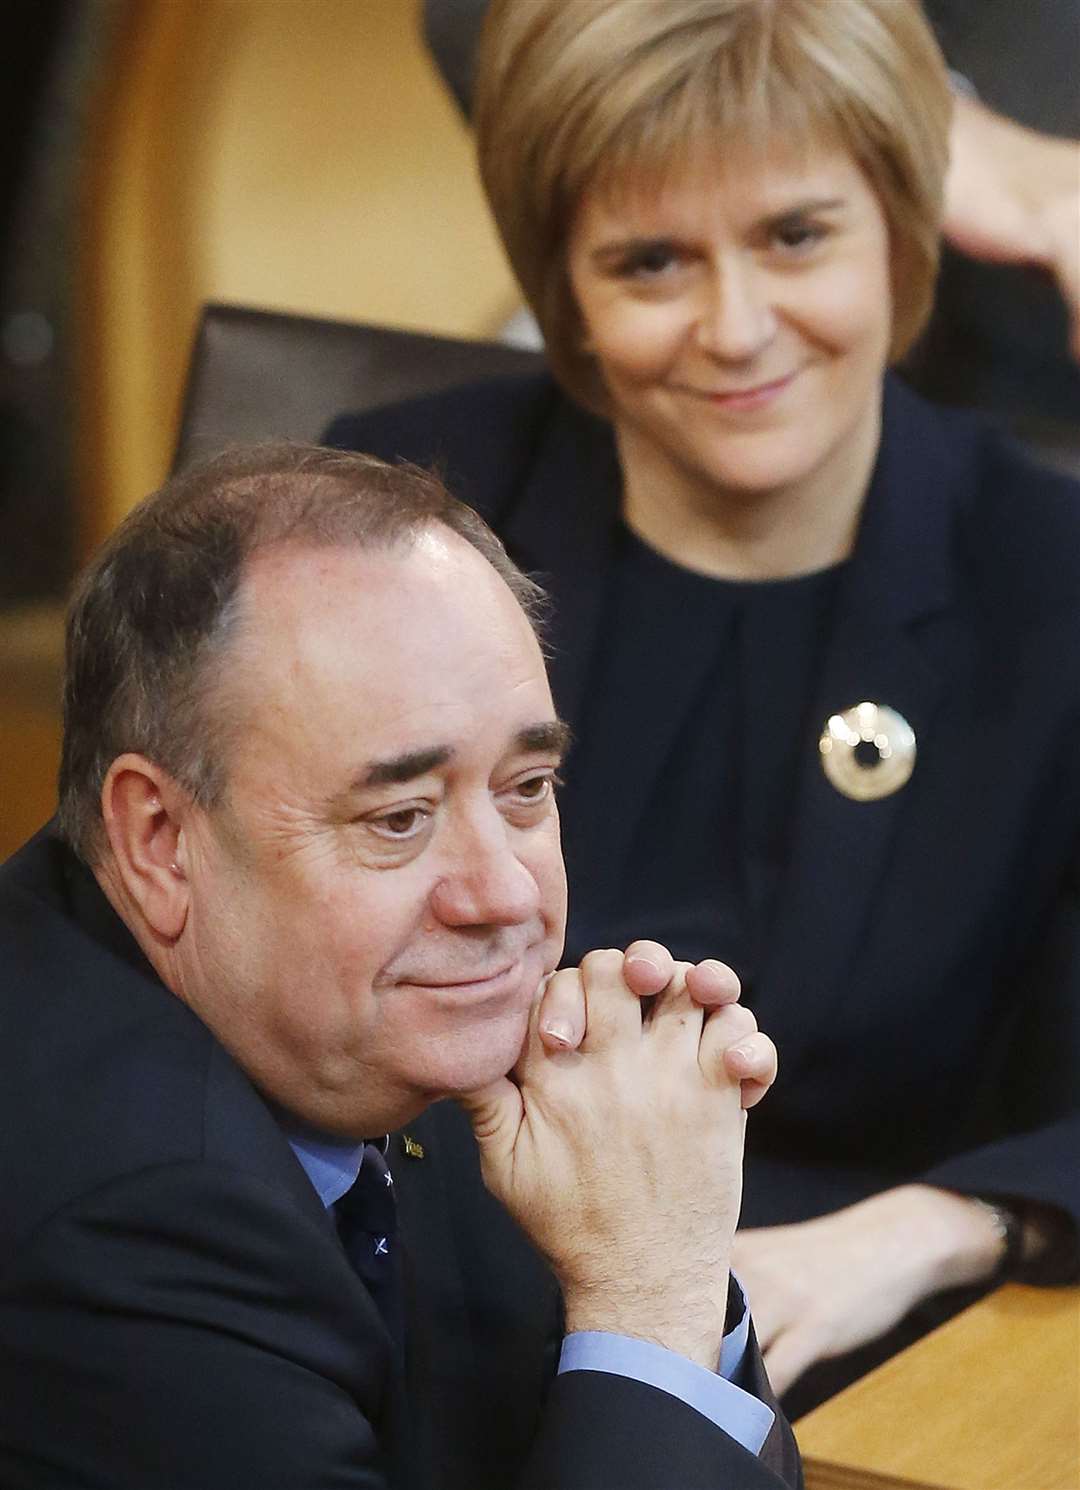 Alex Salmond and his successor Nicola Sturgeon after he resigned as First Minister (Danny Lawson/PA)